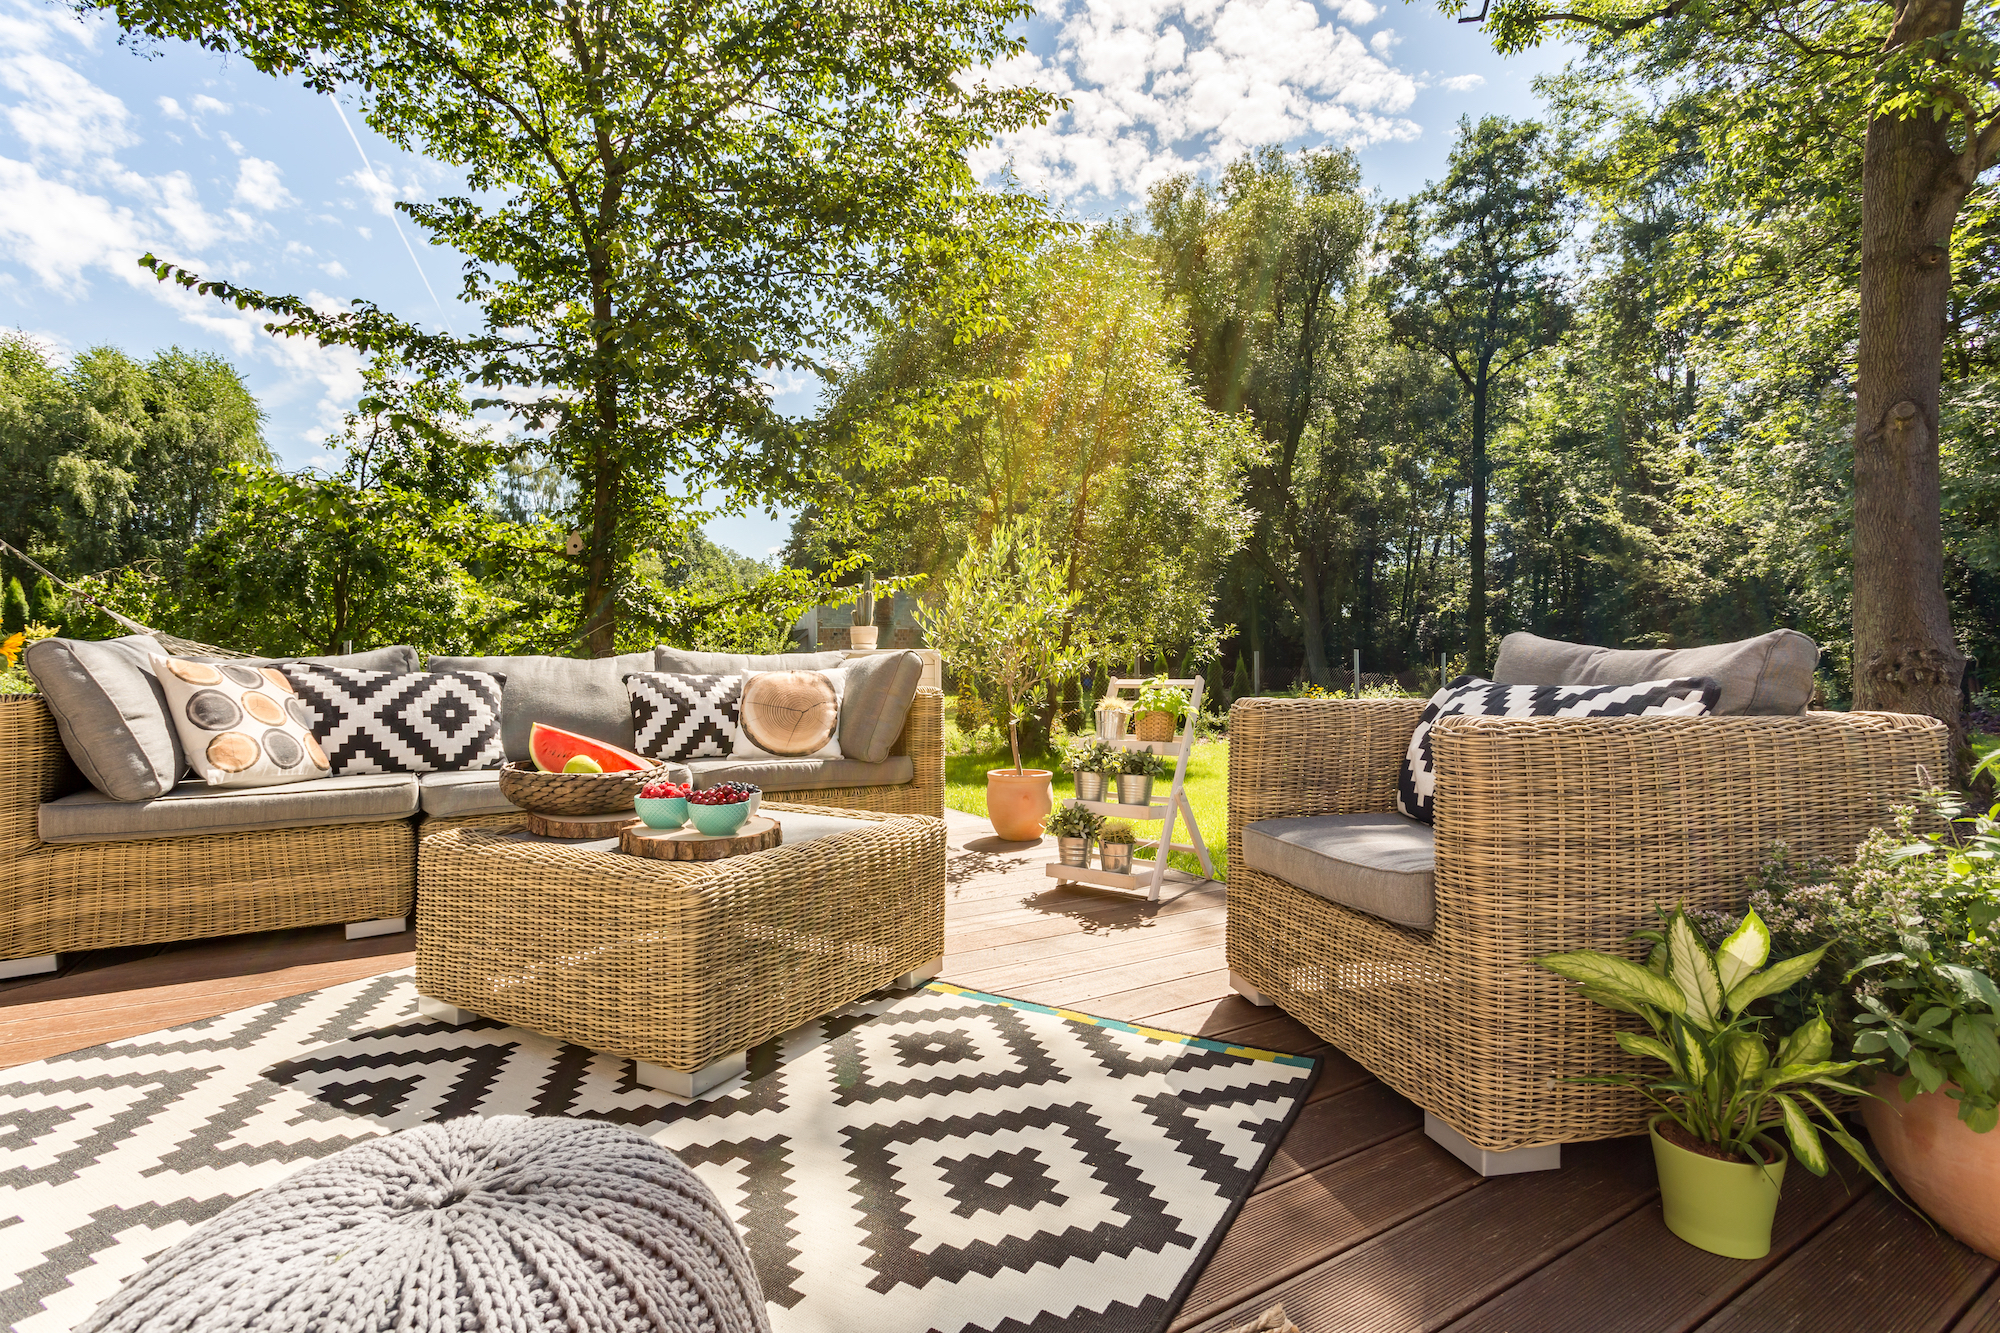 How to Protect Outdoor Furniture & Cushions